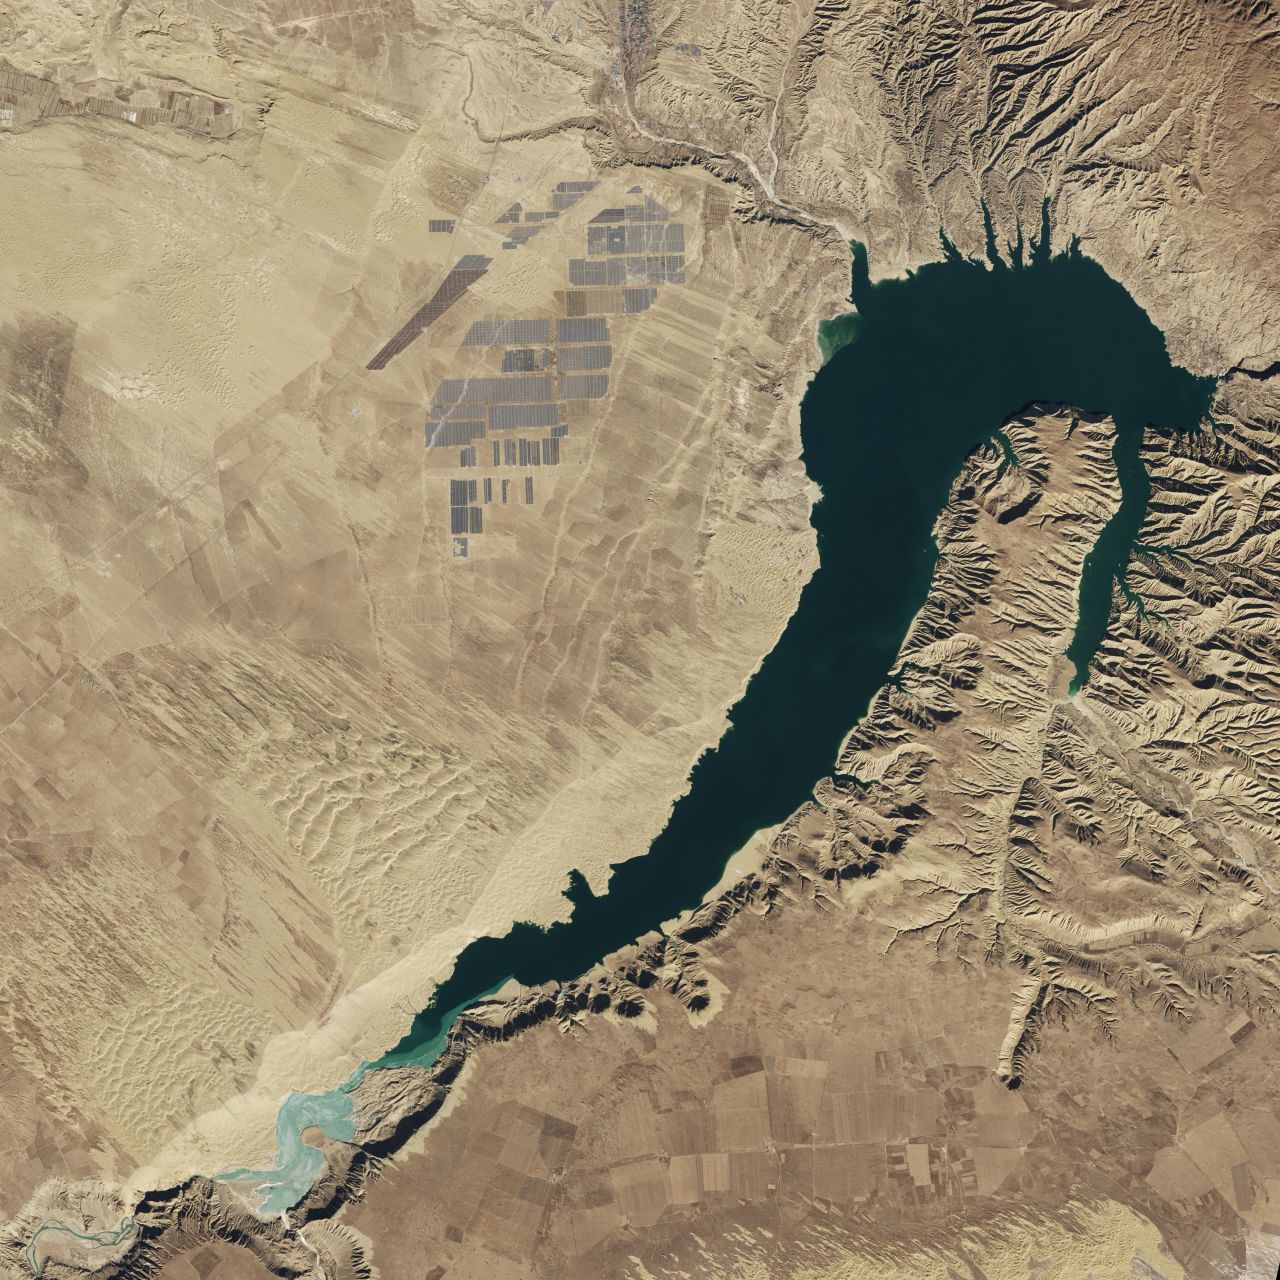 Captured by <a href="https://earthobservatory.nasa.gov/images/89668/longyangxia-dam-solar-park" target="_blank" target="_blank">NASA's Landsat 8 satellite</a> in January 2017, the Longyangxia Dam Solar Park in Qinghai province has a capacity of 850 megawatts. At the time the site had a reported <a href="https://www.climatecentral.org/news/china-solar-farm-satellite-21182" target="_blank" target="_blank">4 million solar panels</a>, part of a wider effort by China to produce 110 gigawatts of solar power by 2020.<br />